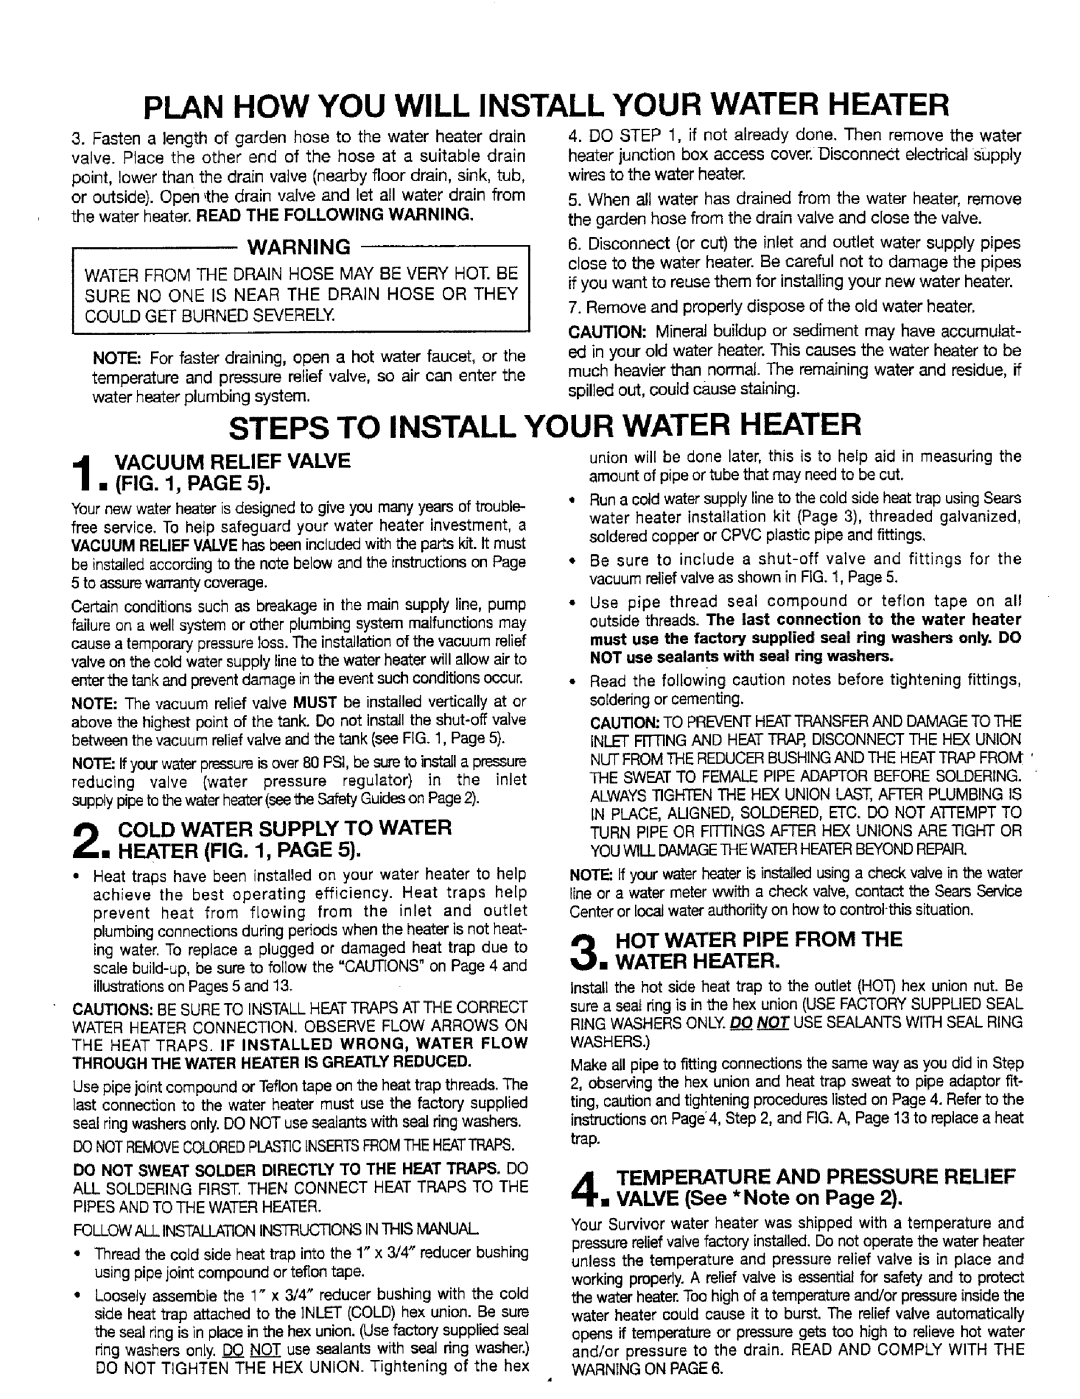 Sears 449.32041 Steps To Install Your Water Heater, Vacuum Relief Valve , Page, Cold Water Supply To Water Heater , Page 